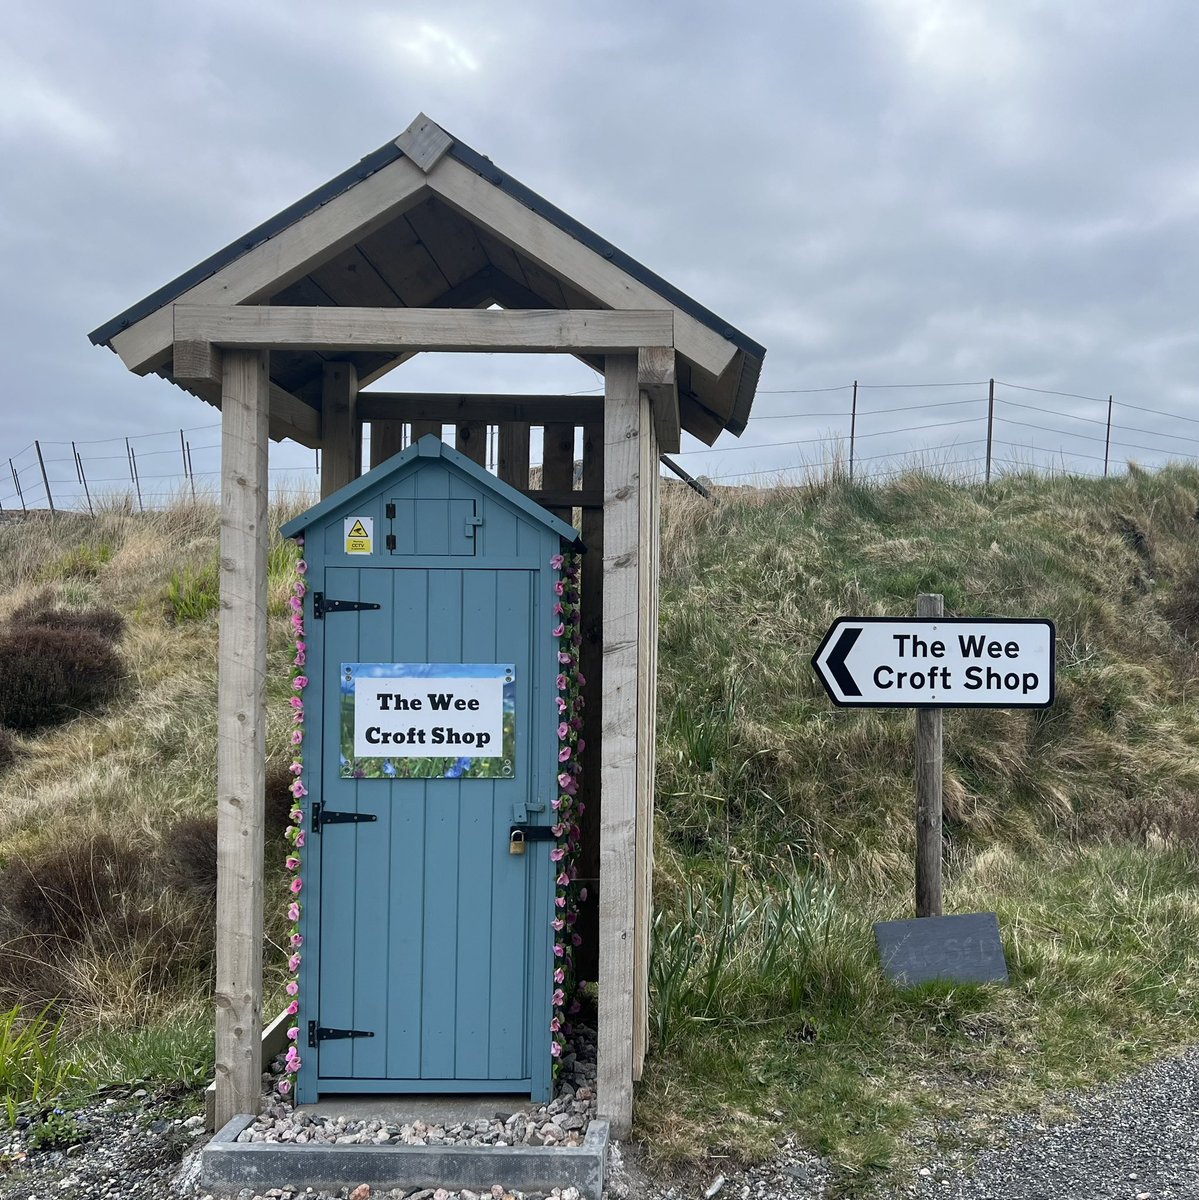 A wee tiny shop as you walk out of Tarbert on Harris 🛍️🏴󠁧󠁢󠁳󠁣󠁴󠁿👍 The signs are almost as big as the store 😉